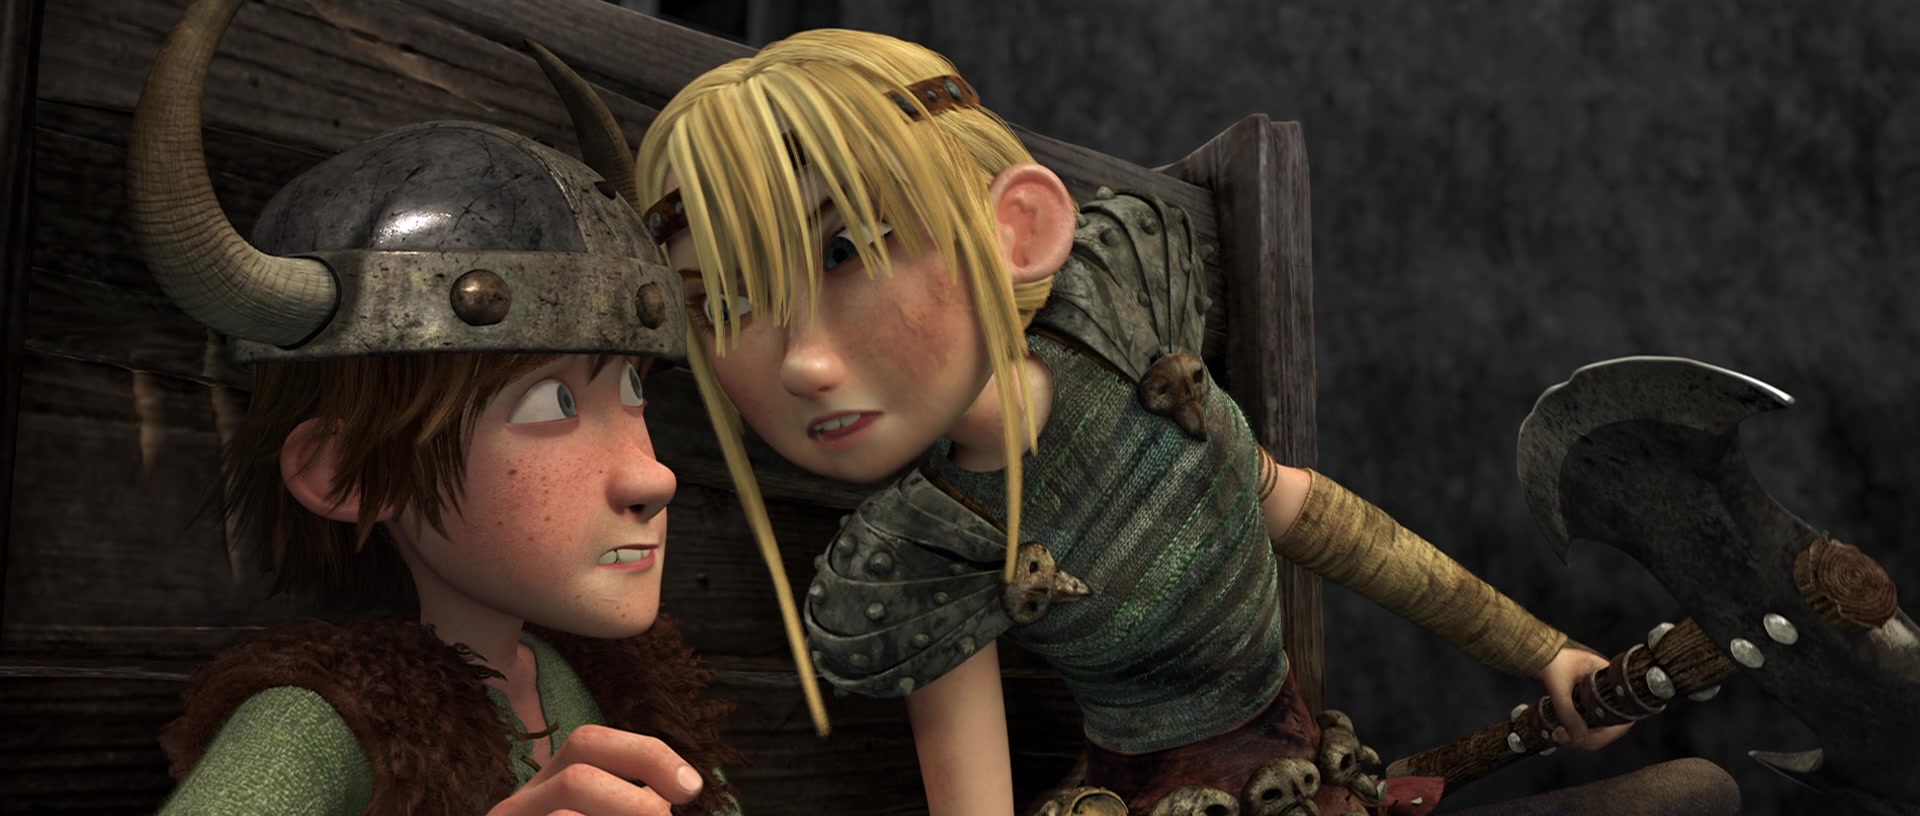 How to Train Your Dragon (2010) Image. 